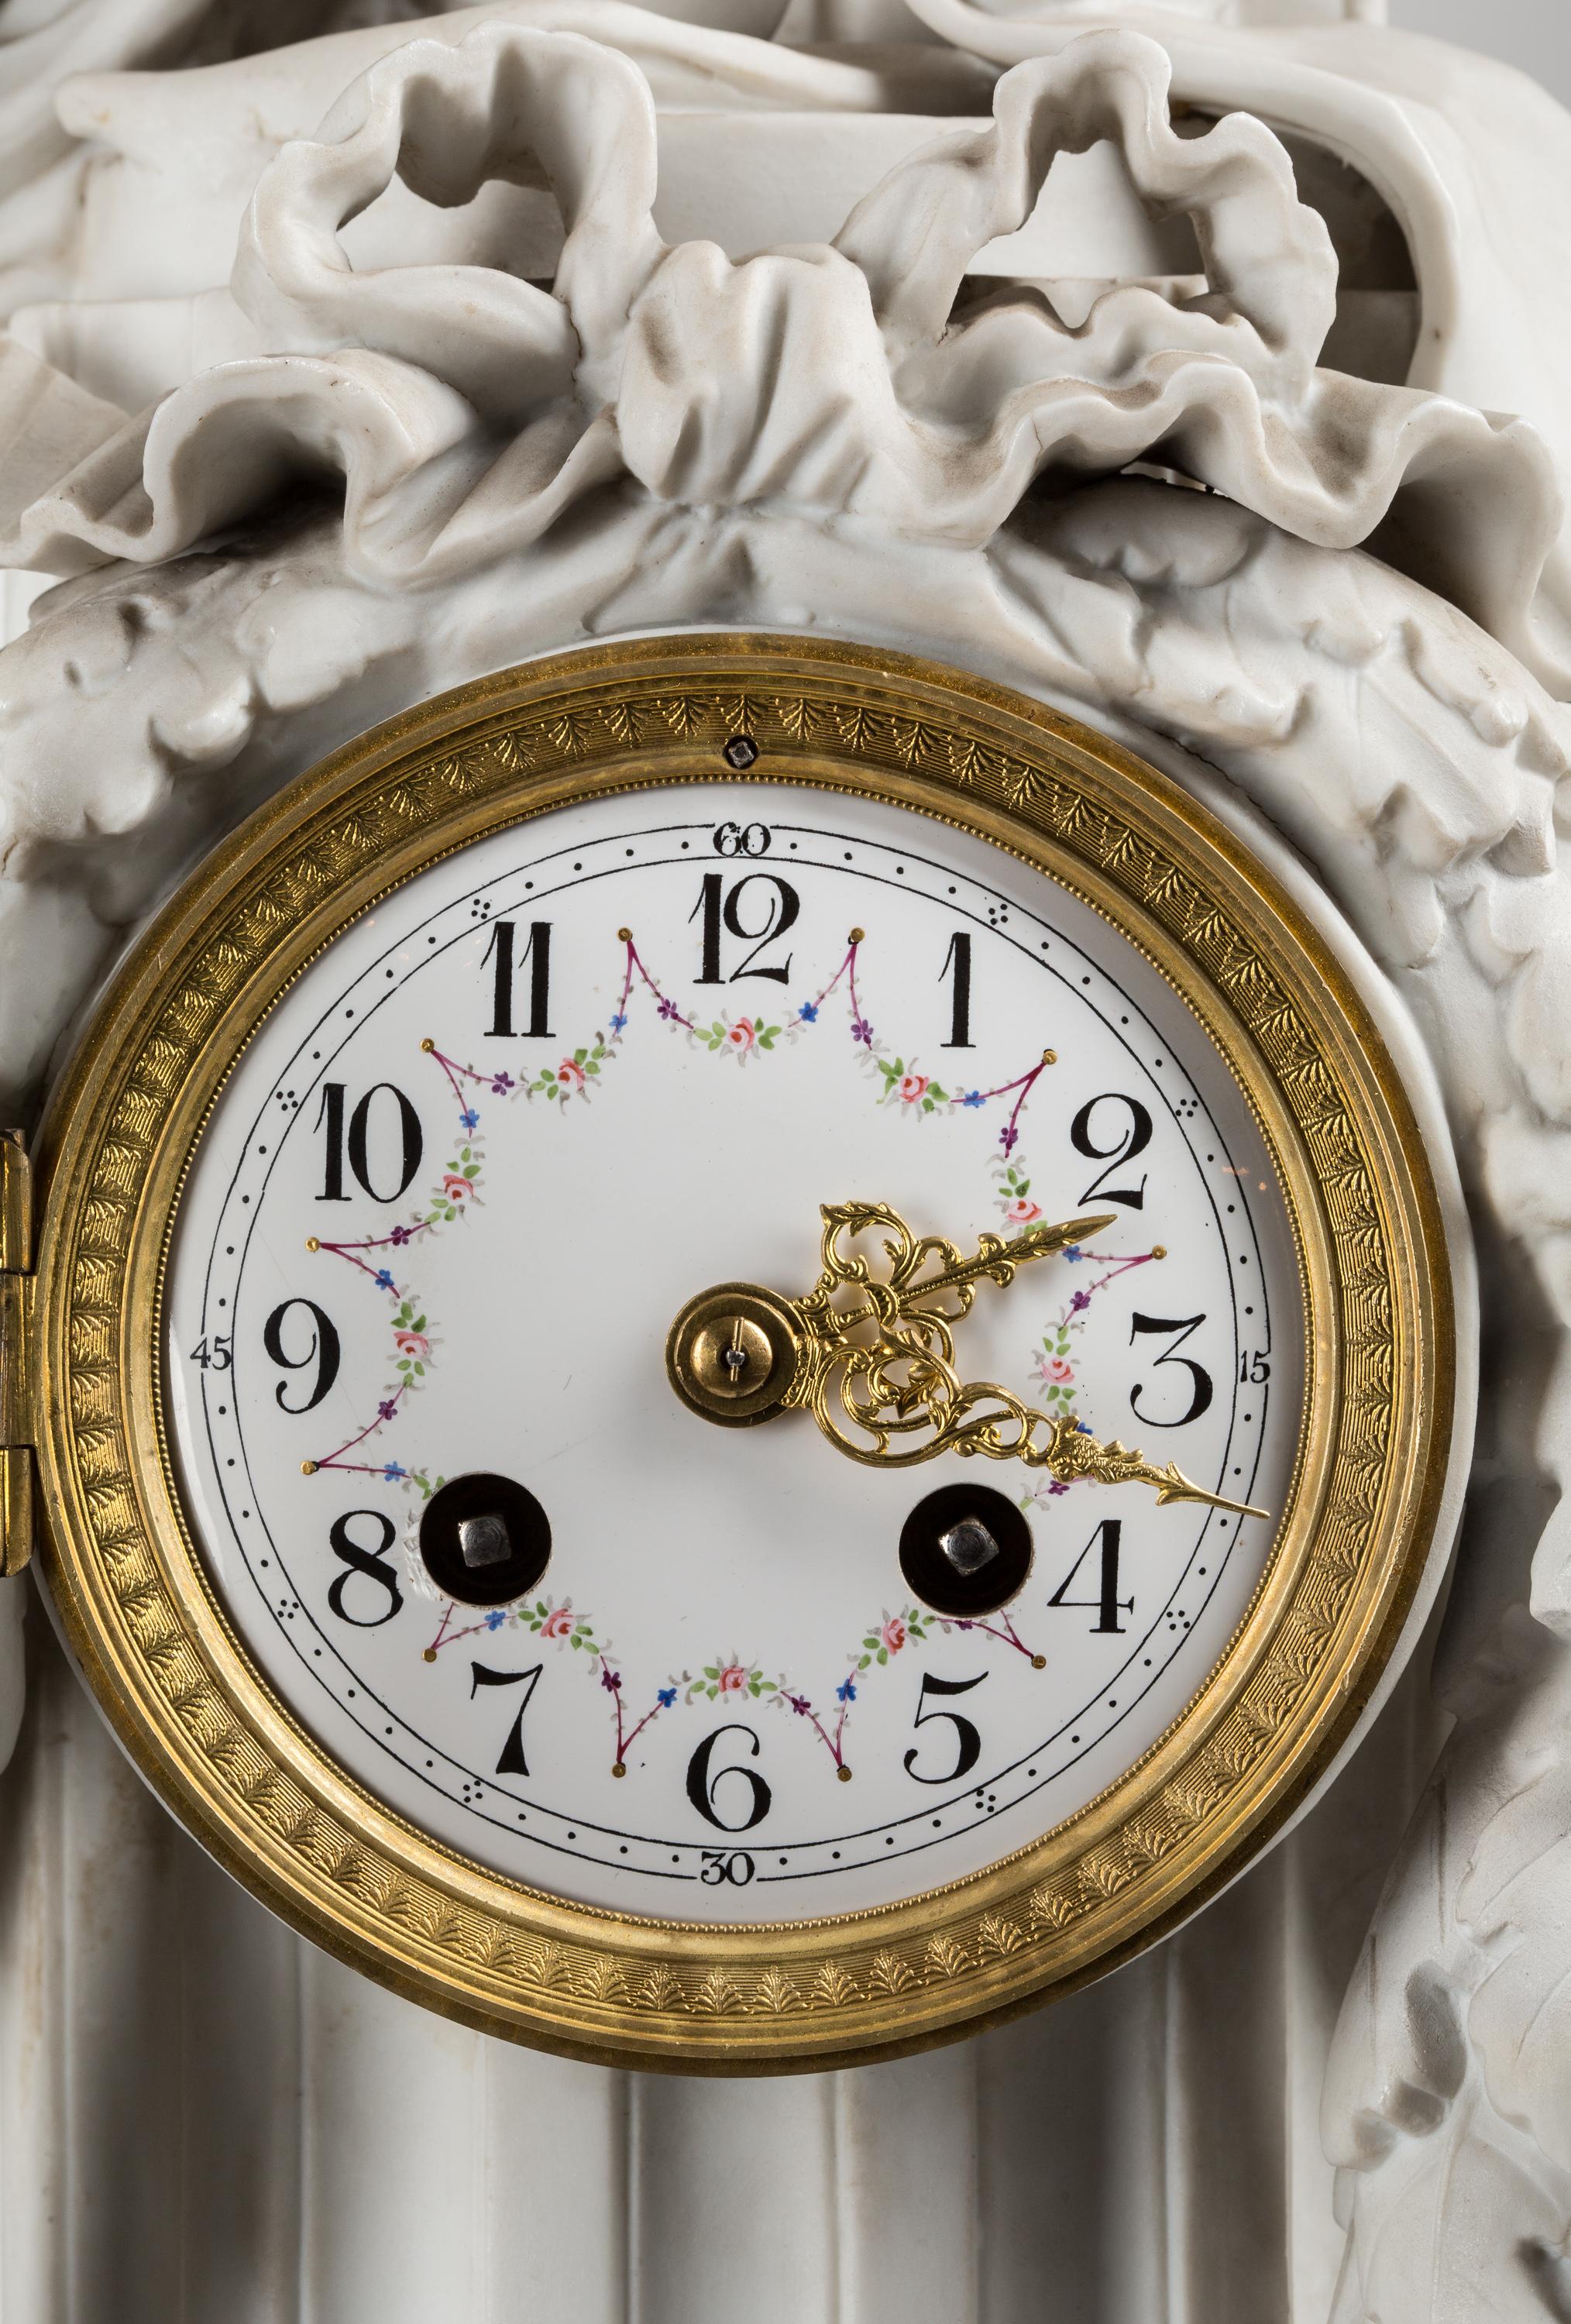 Empire Revival 19th Century French Neoclassical Bisque Porcelain Mantel Clock with Muse Clio